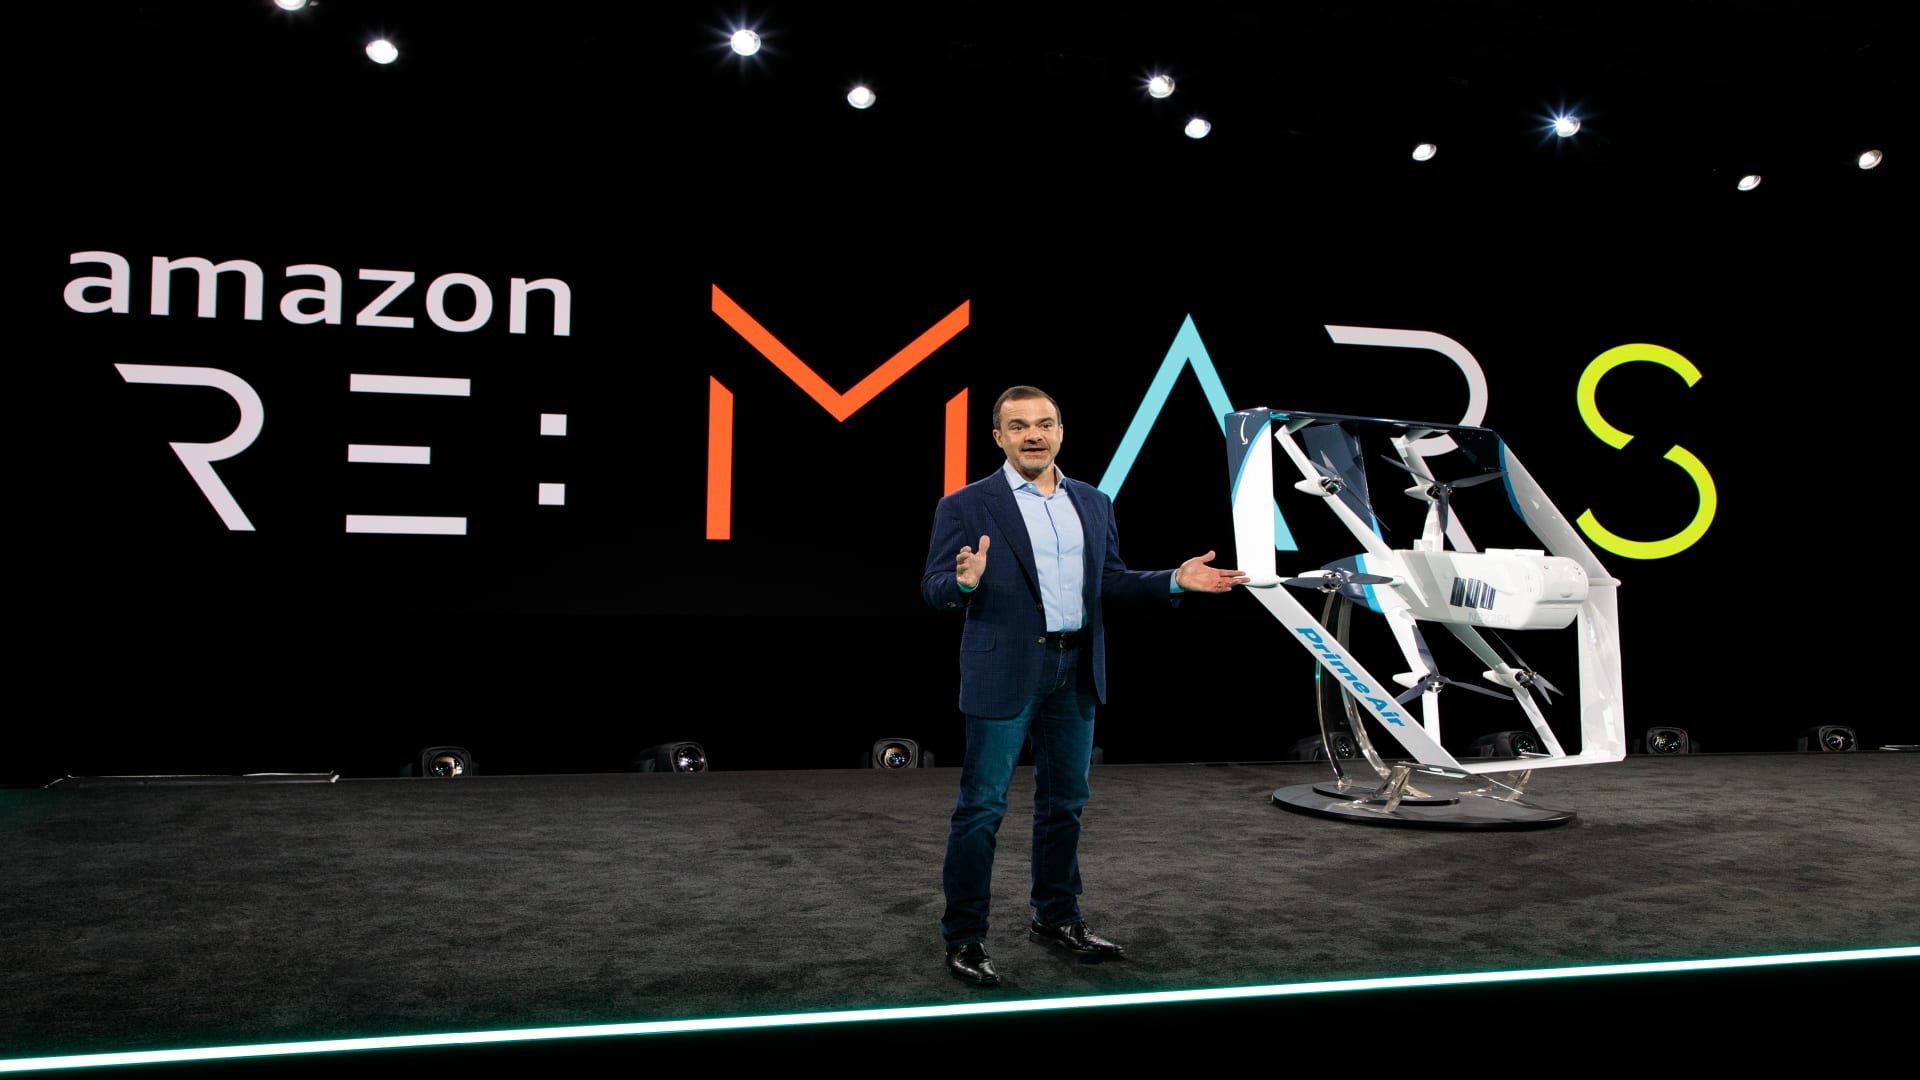 Amazon re:MARS robotics and AI conference not happening in 2023